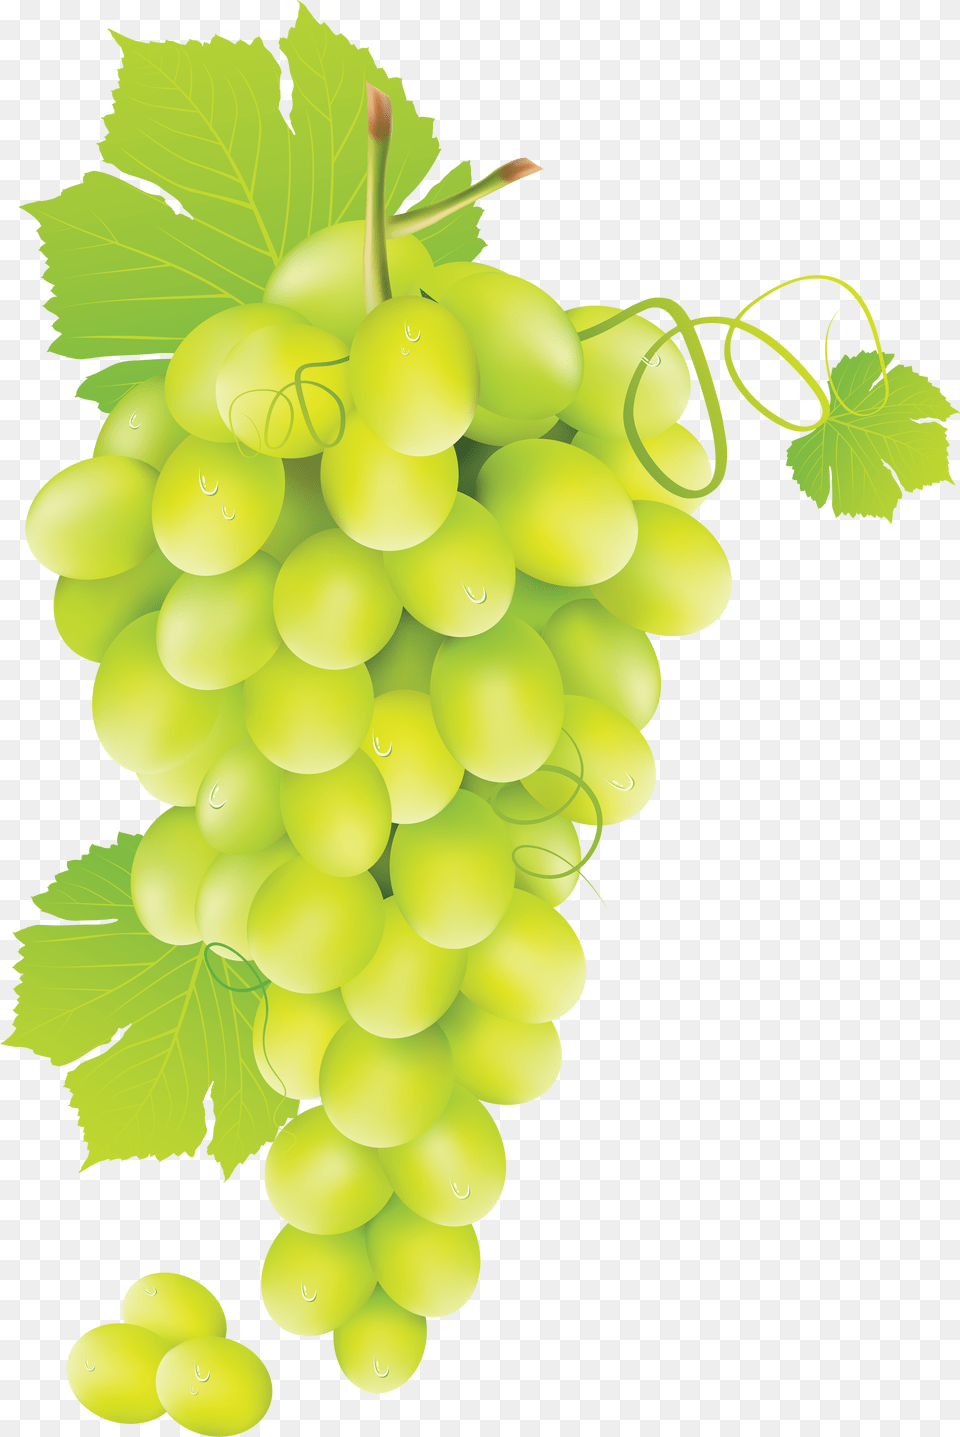 Green Grapes Image For Green Grapes, Food, Fruit, Plant, Produce Free Png Download